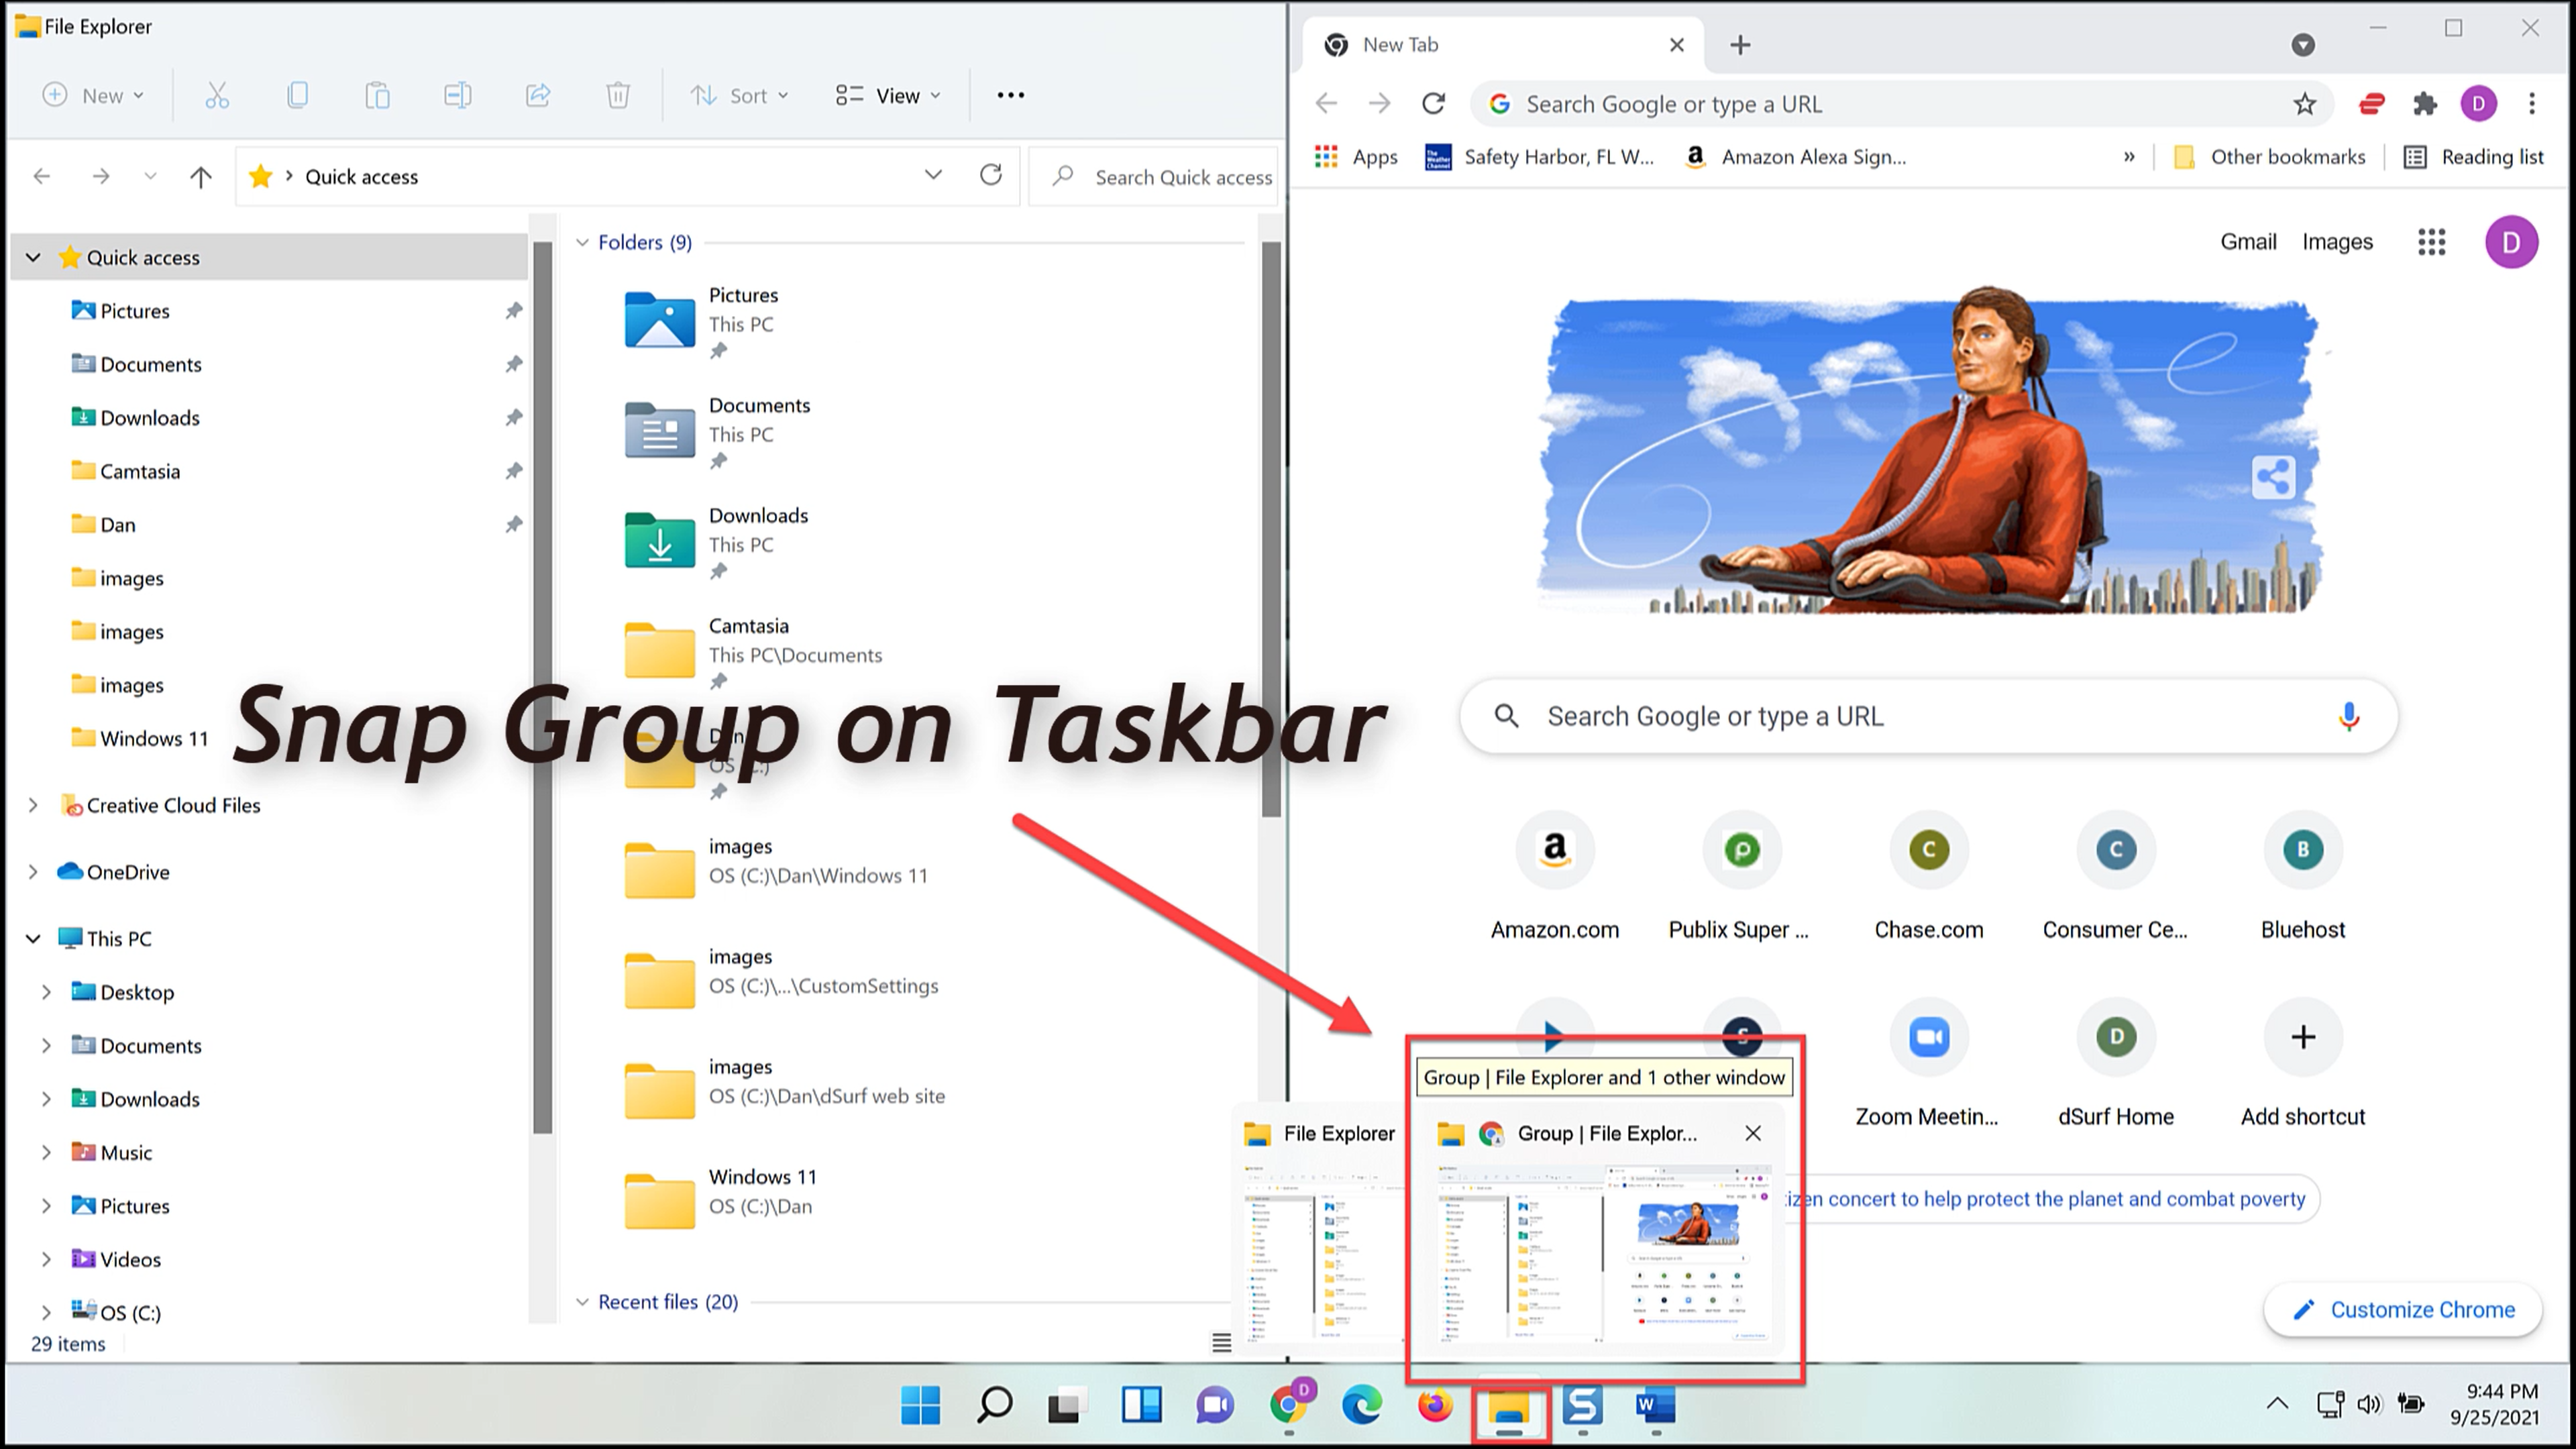 A Snap Group shown by hovering the mouse pointer over the Taskbar.